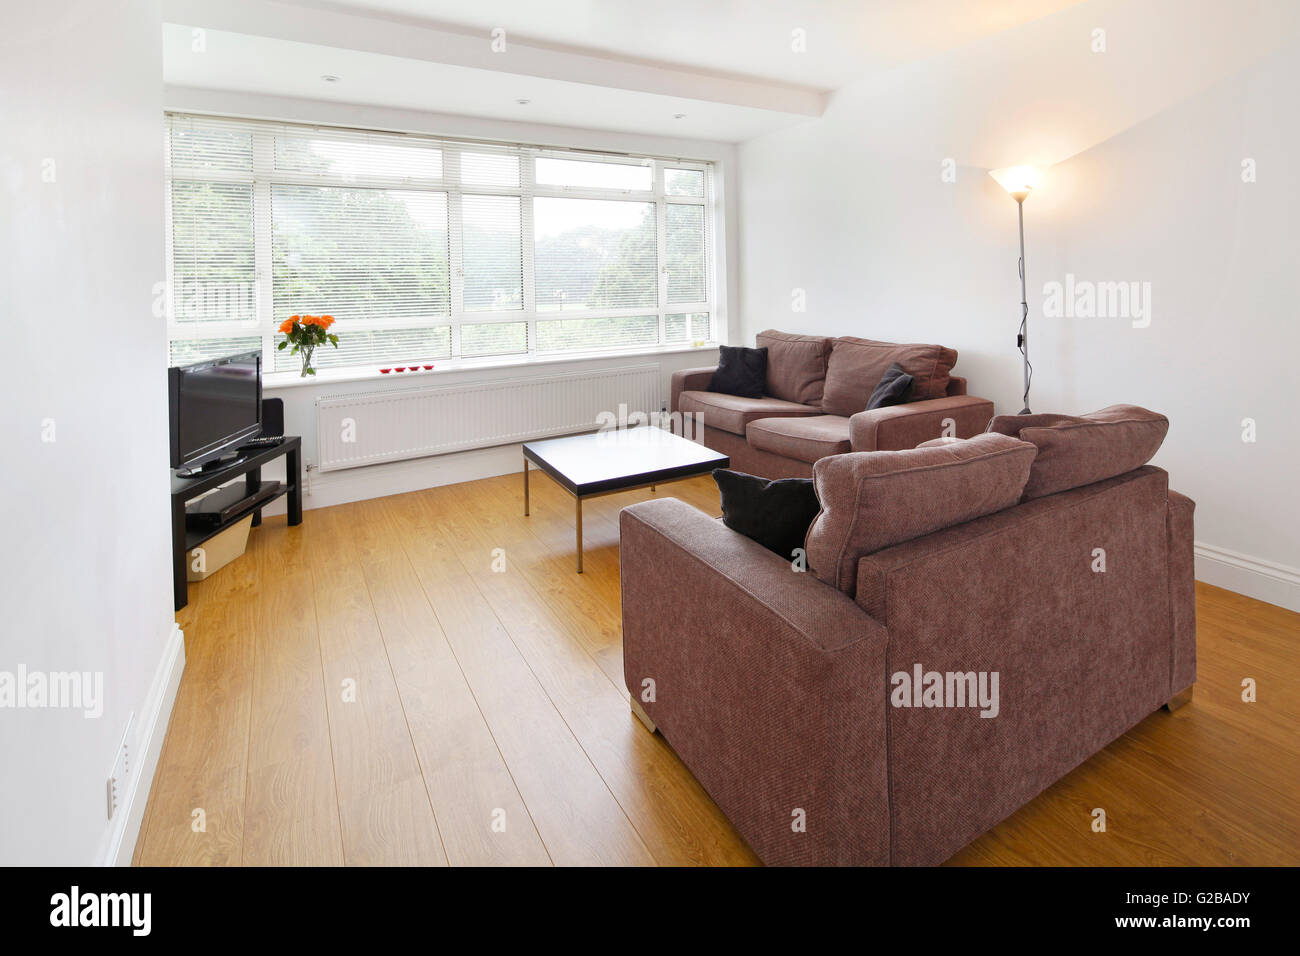 Ellington Court, Southgate. White living room with wood floors and minimal furniture Stock Photo